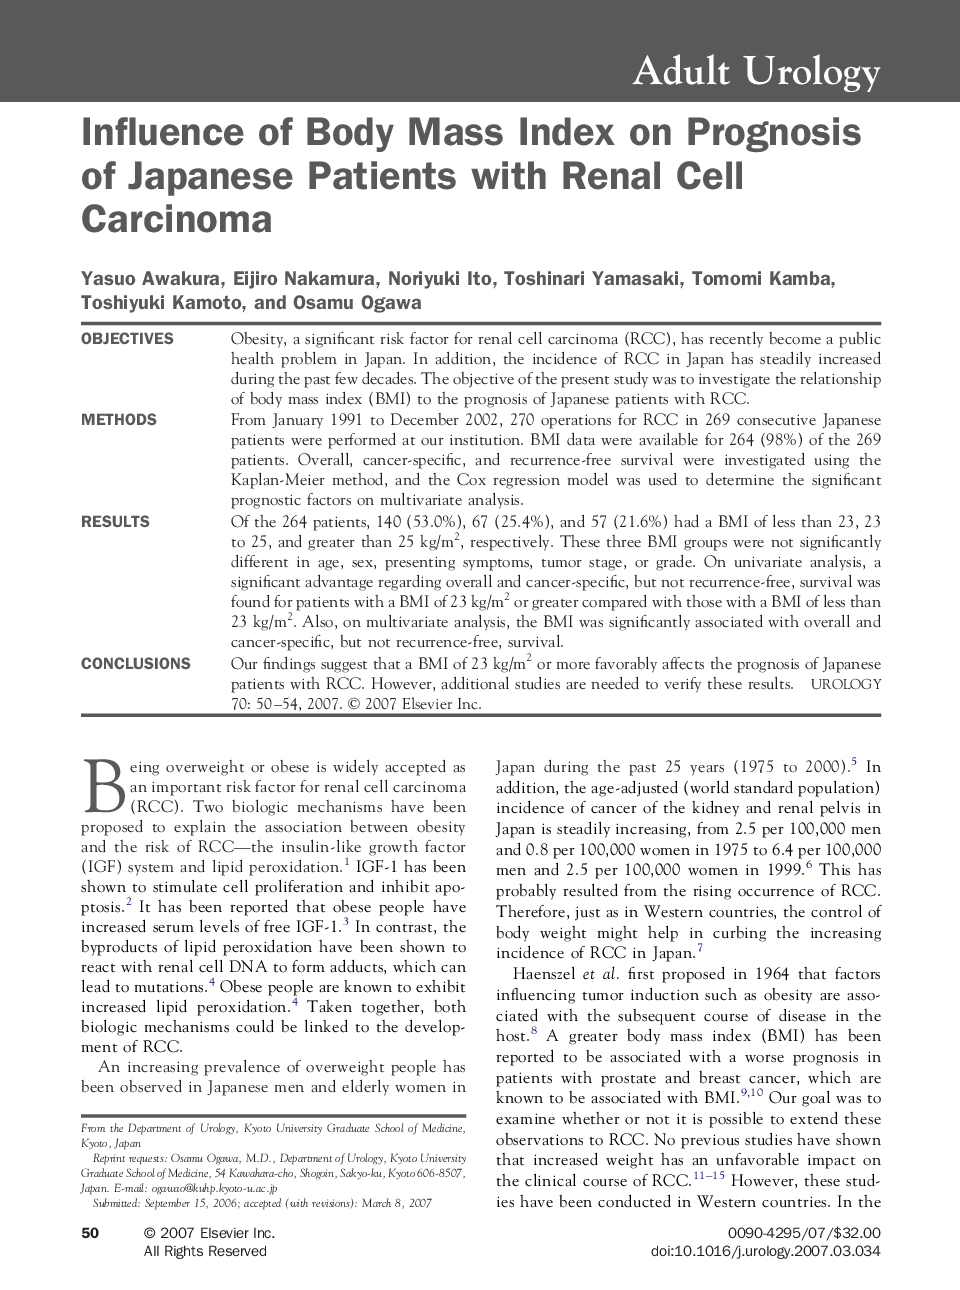 Influence of Body Mass Index on Prognosis of Japanese Patients with Renal Cell Carcinoma